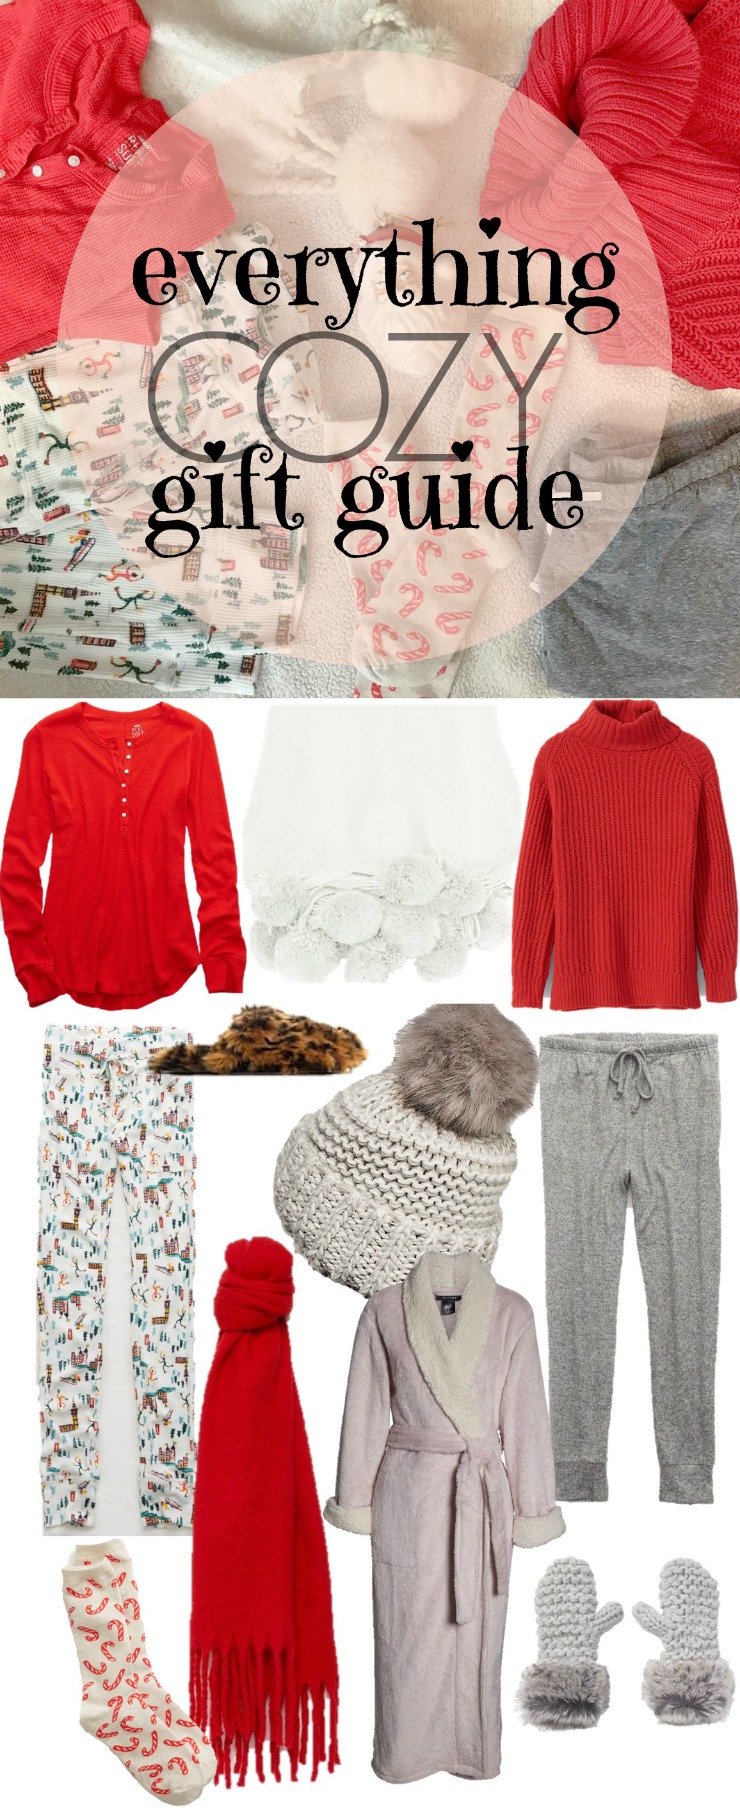 cozy gift guide, hygge gift guide